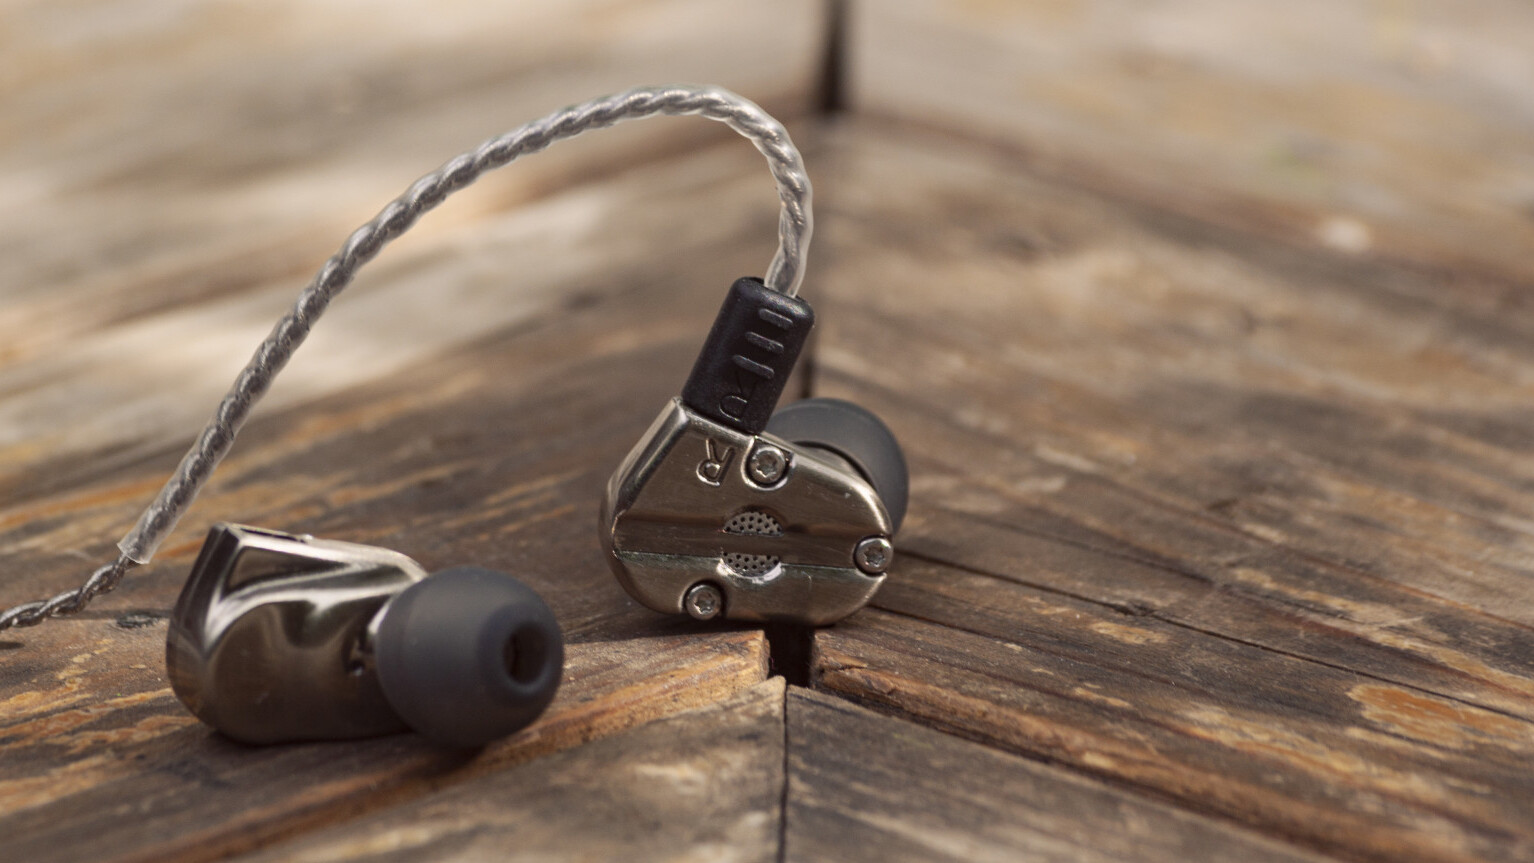 RevoNext’s outstanding $30 earphones make the wired/wireless switch a breeze